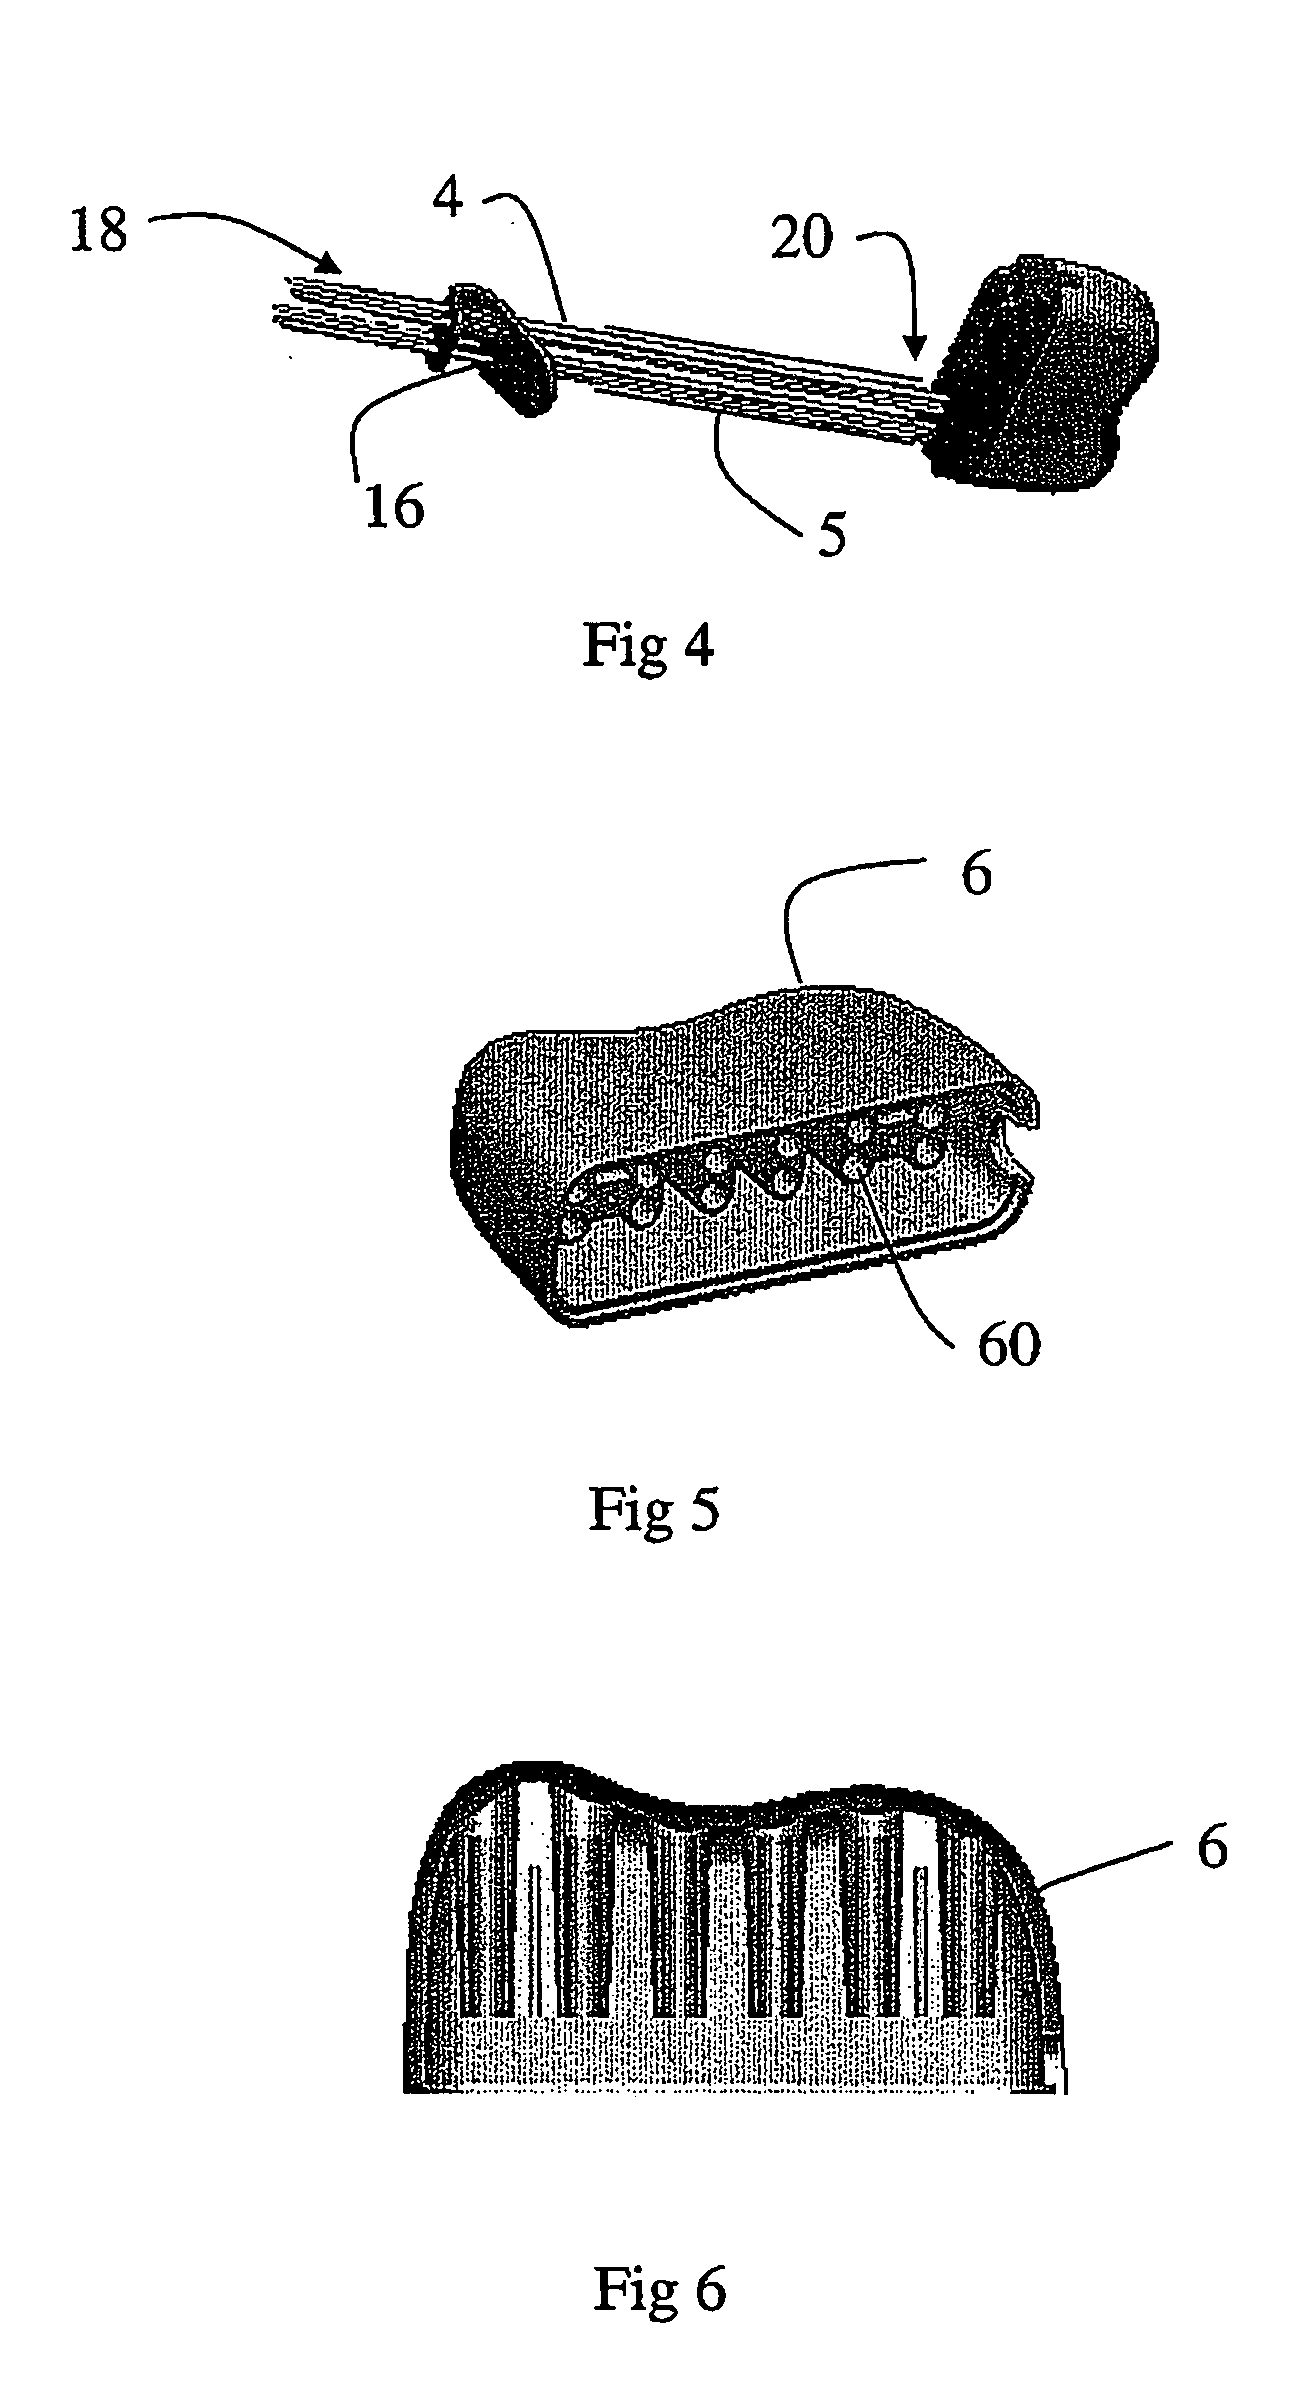 Surgical resection device